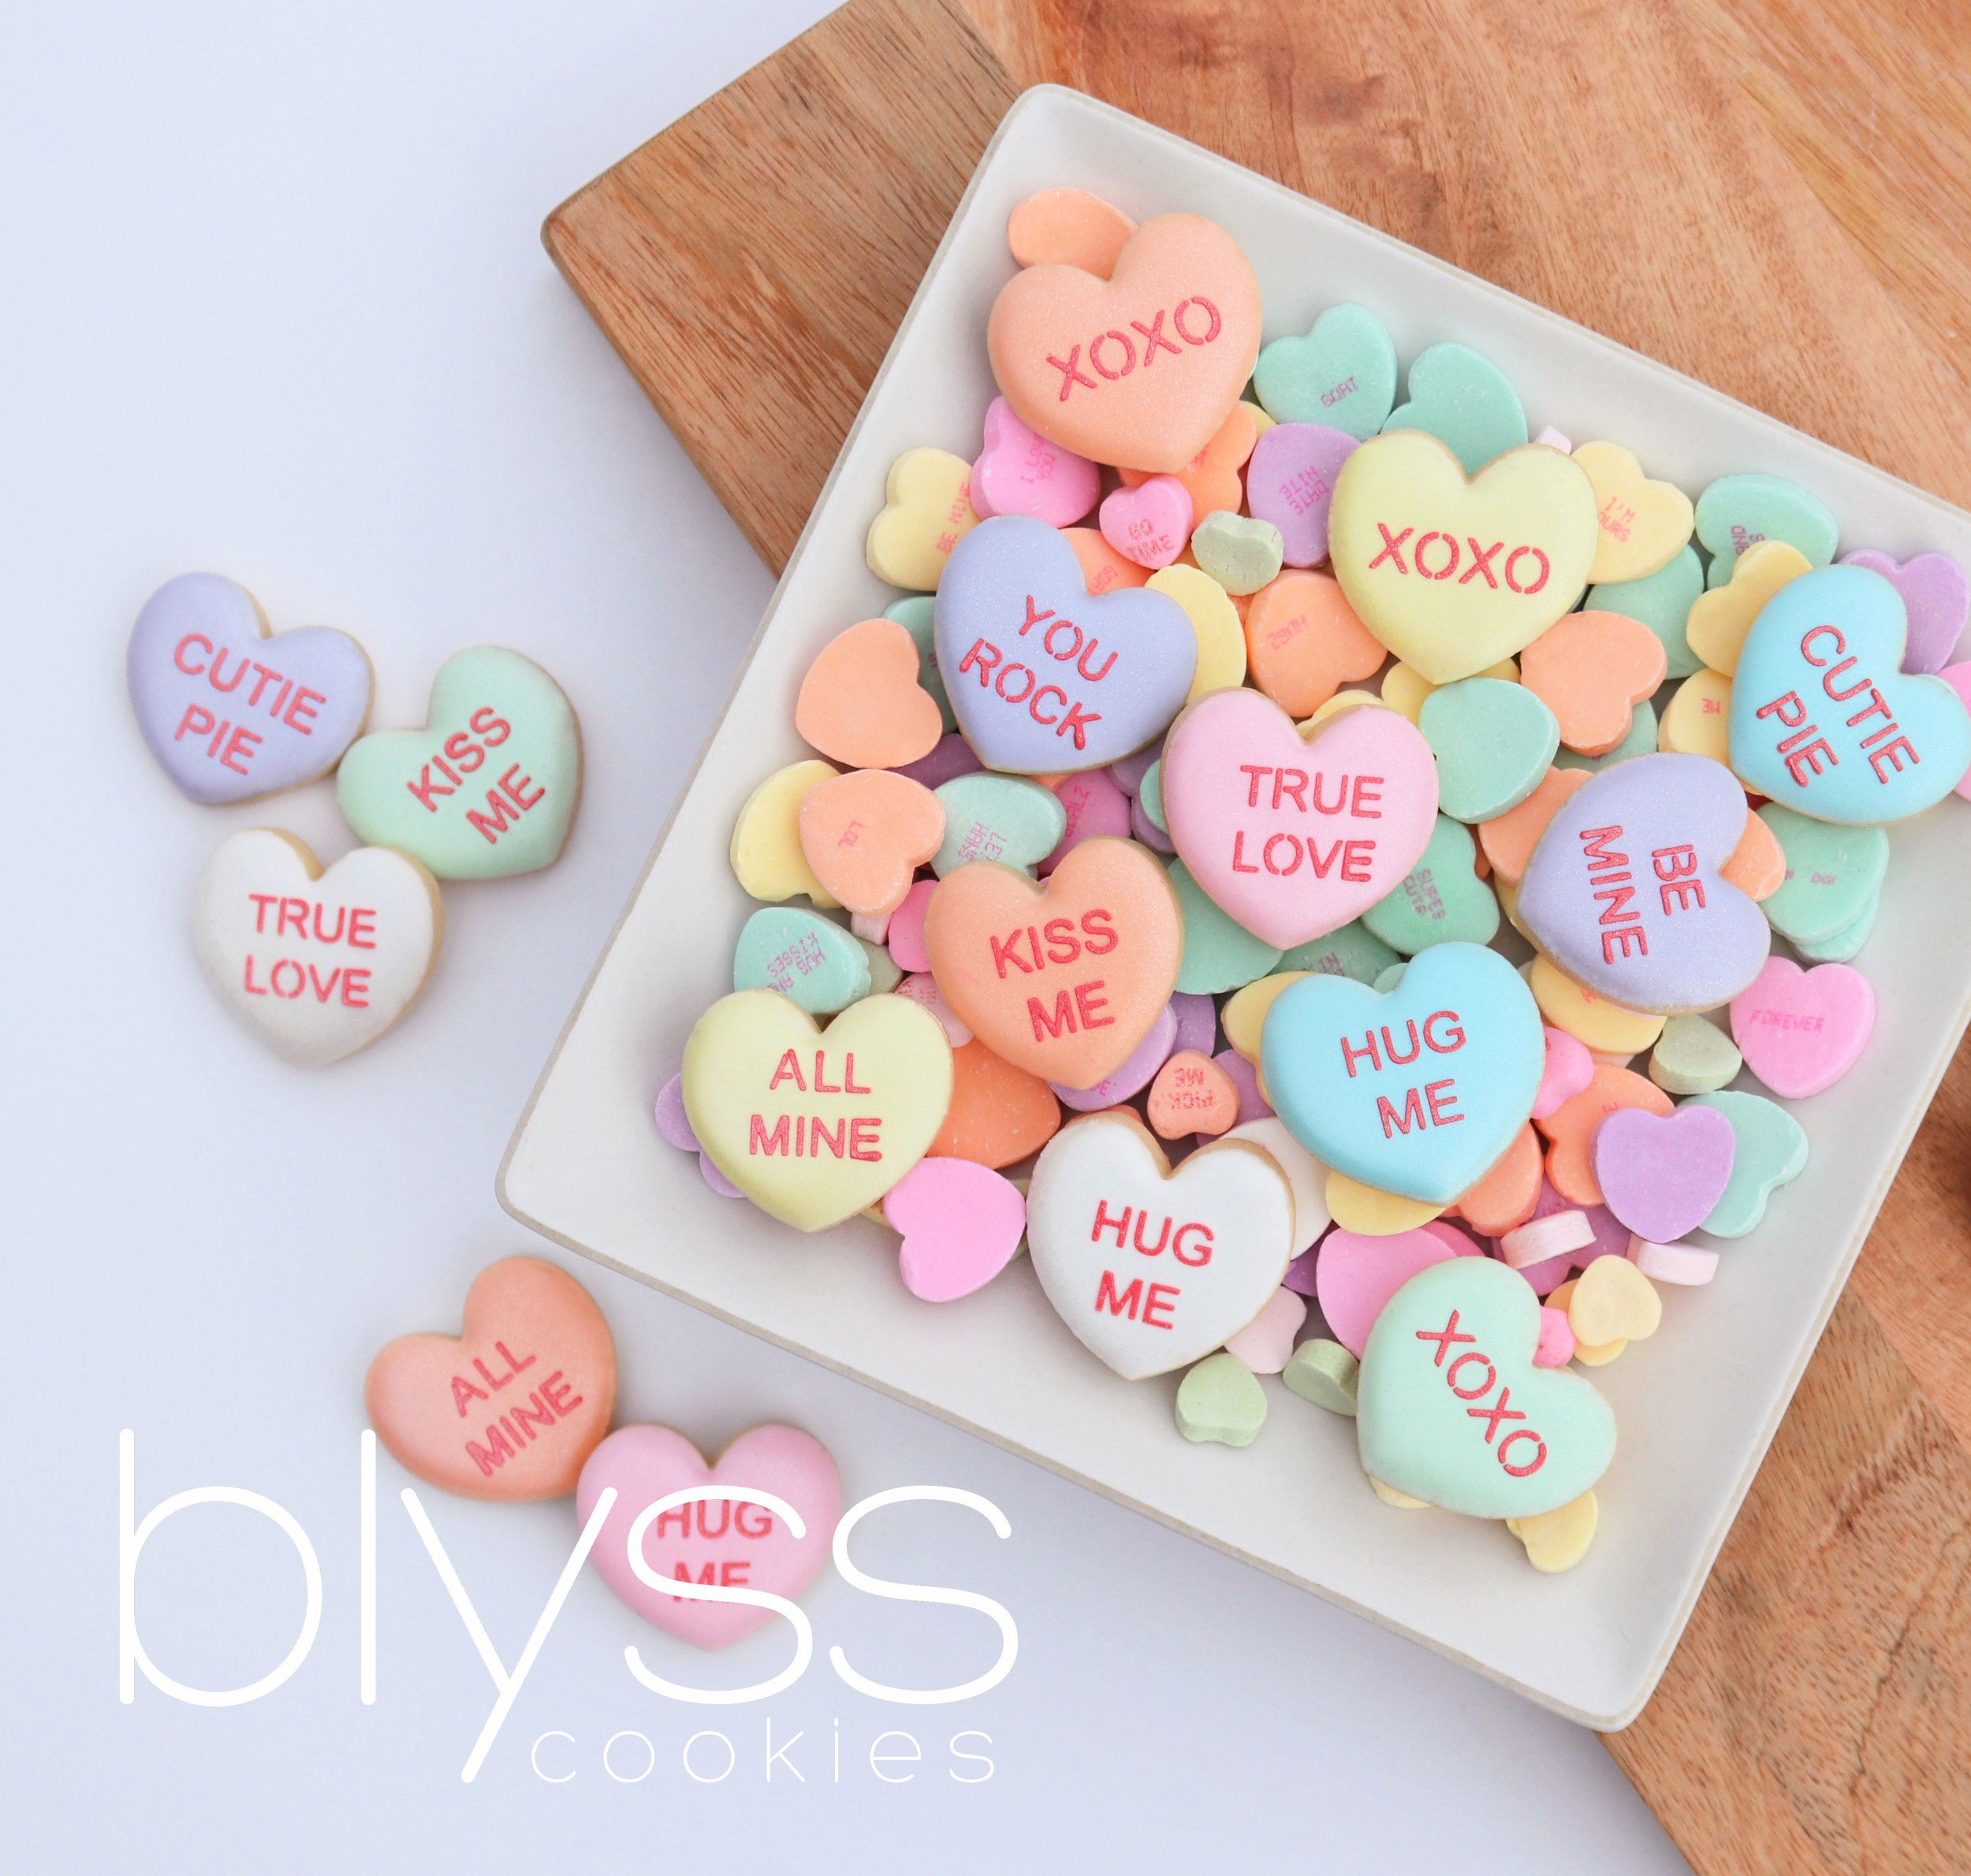 OUR COOKIE DREAMBOX — Blyss Cookies